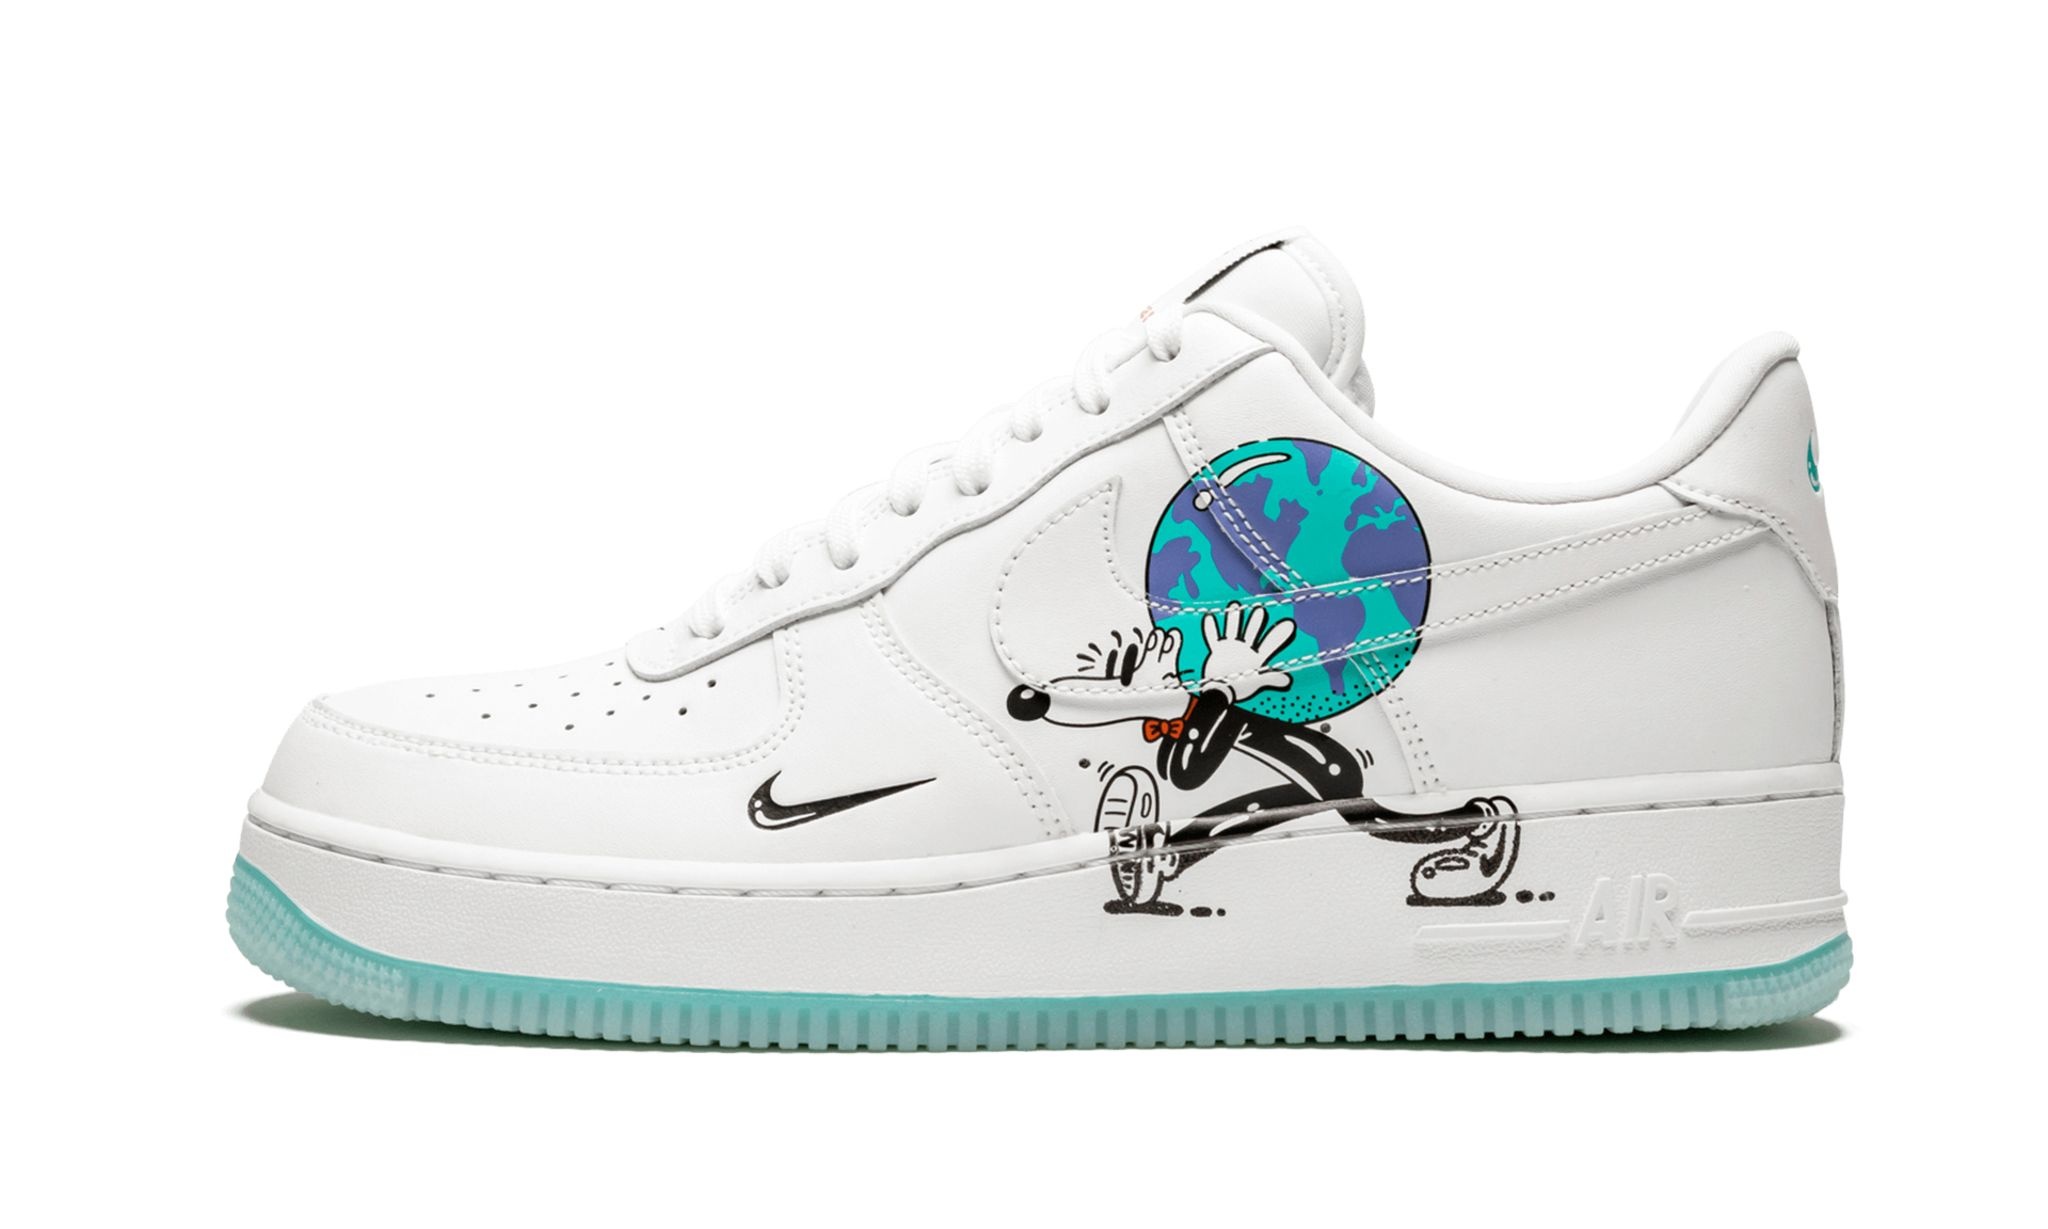 Air Force 1 Flyleather QS "Earth Day" - 1